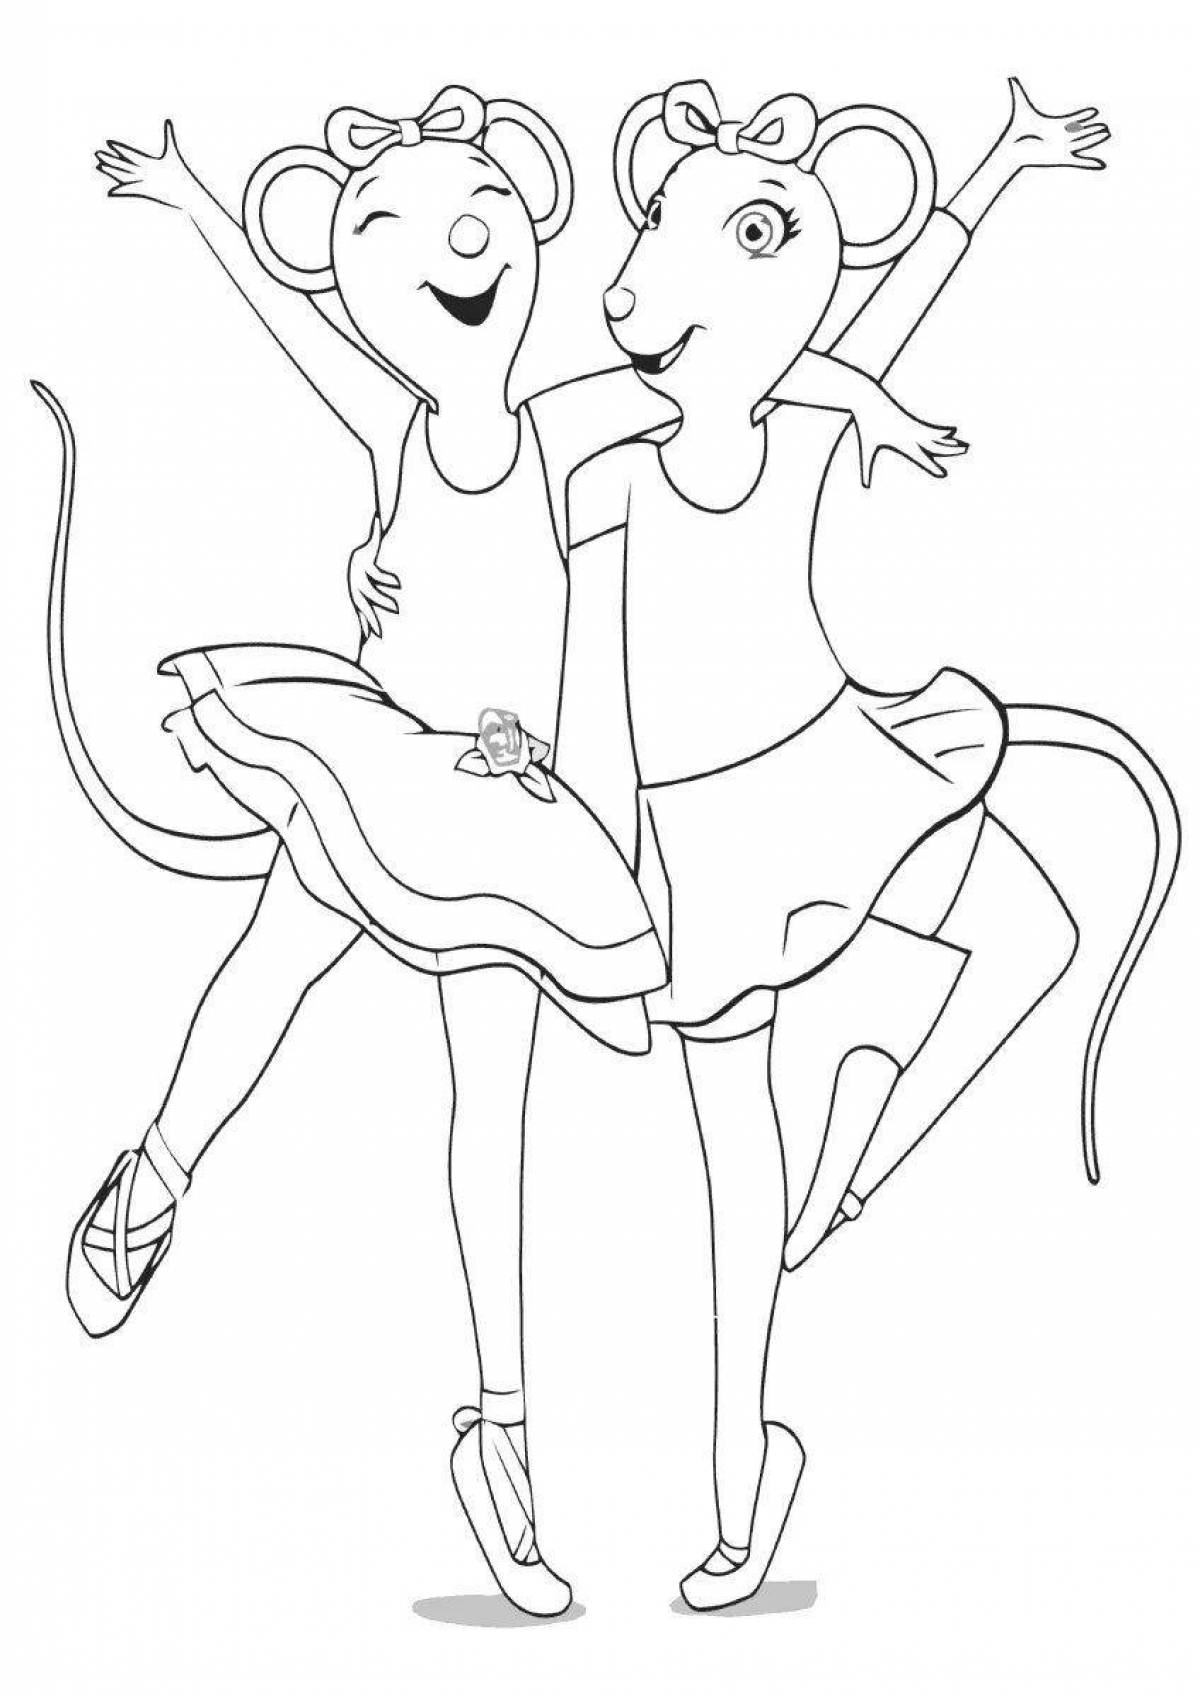 Coloring page dazzling ballerina